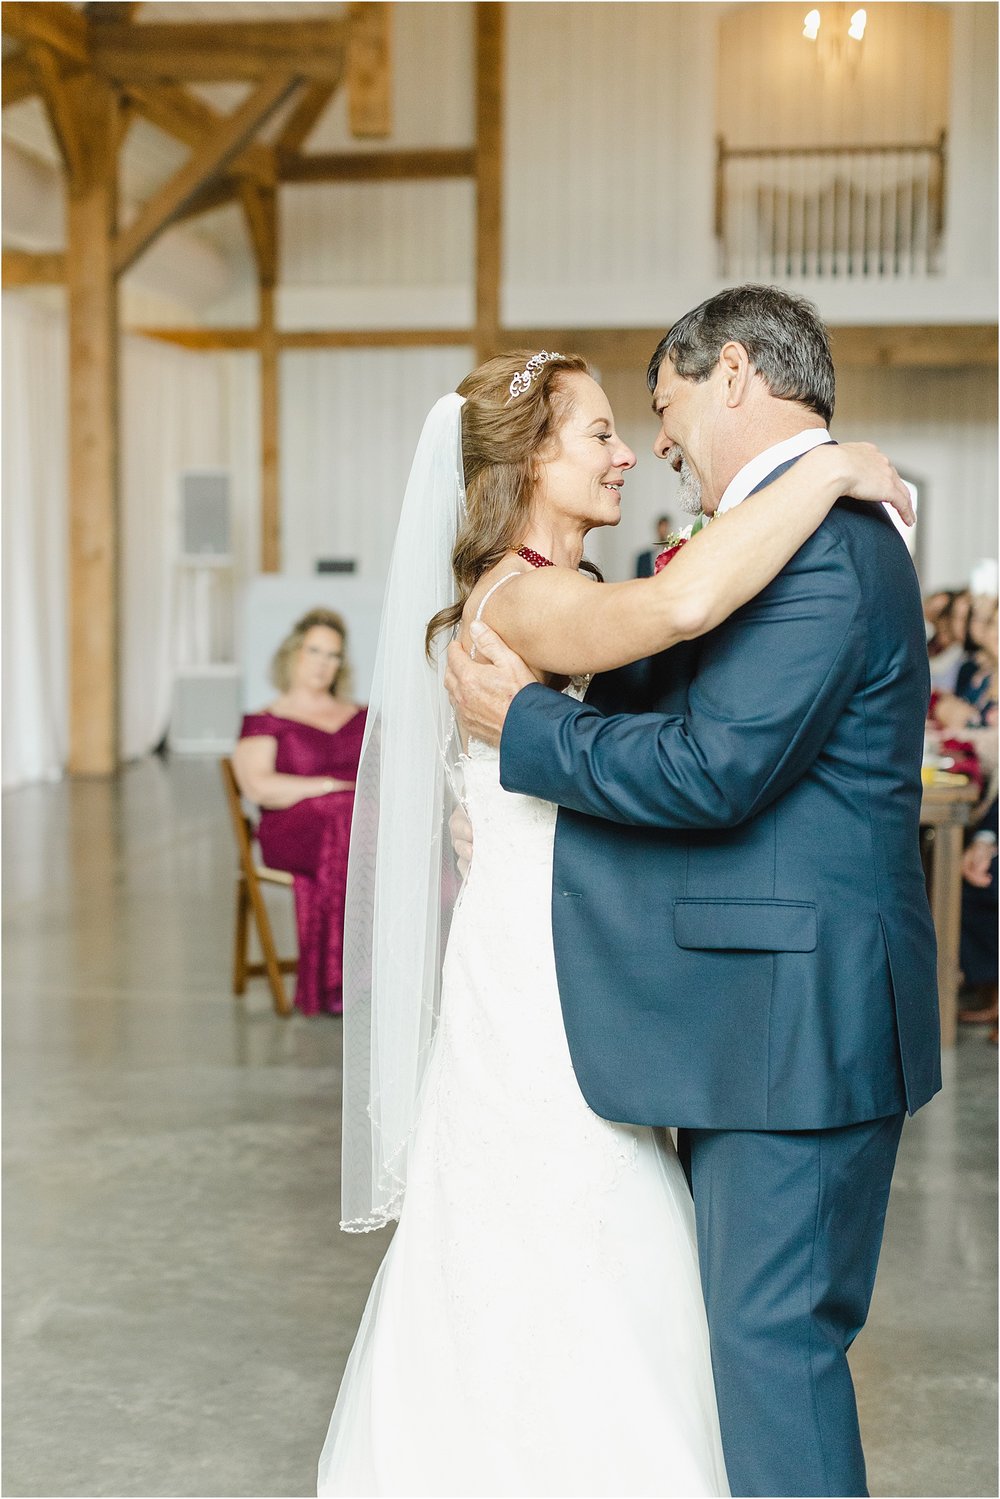 Photo of Bride and Groom's First Dance